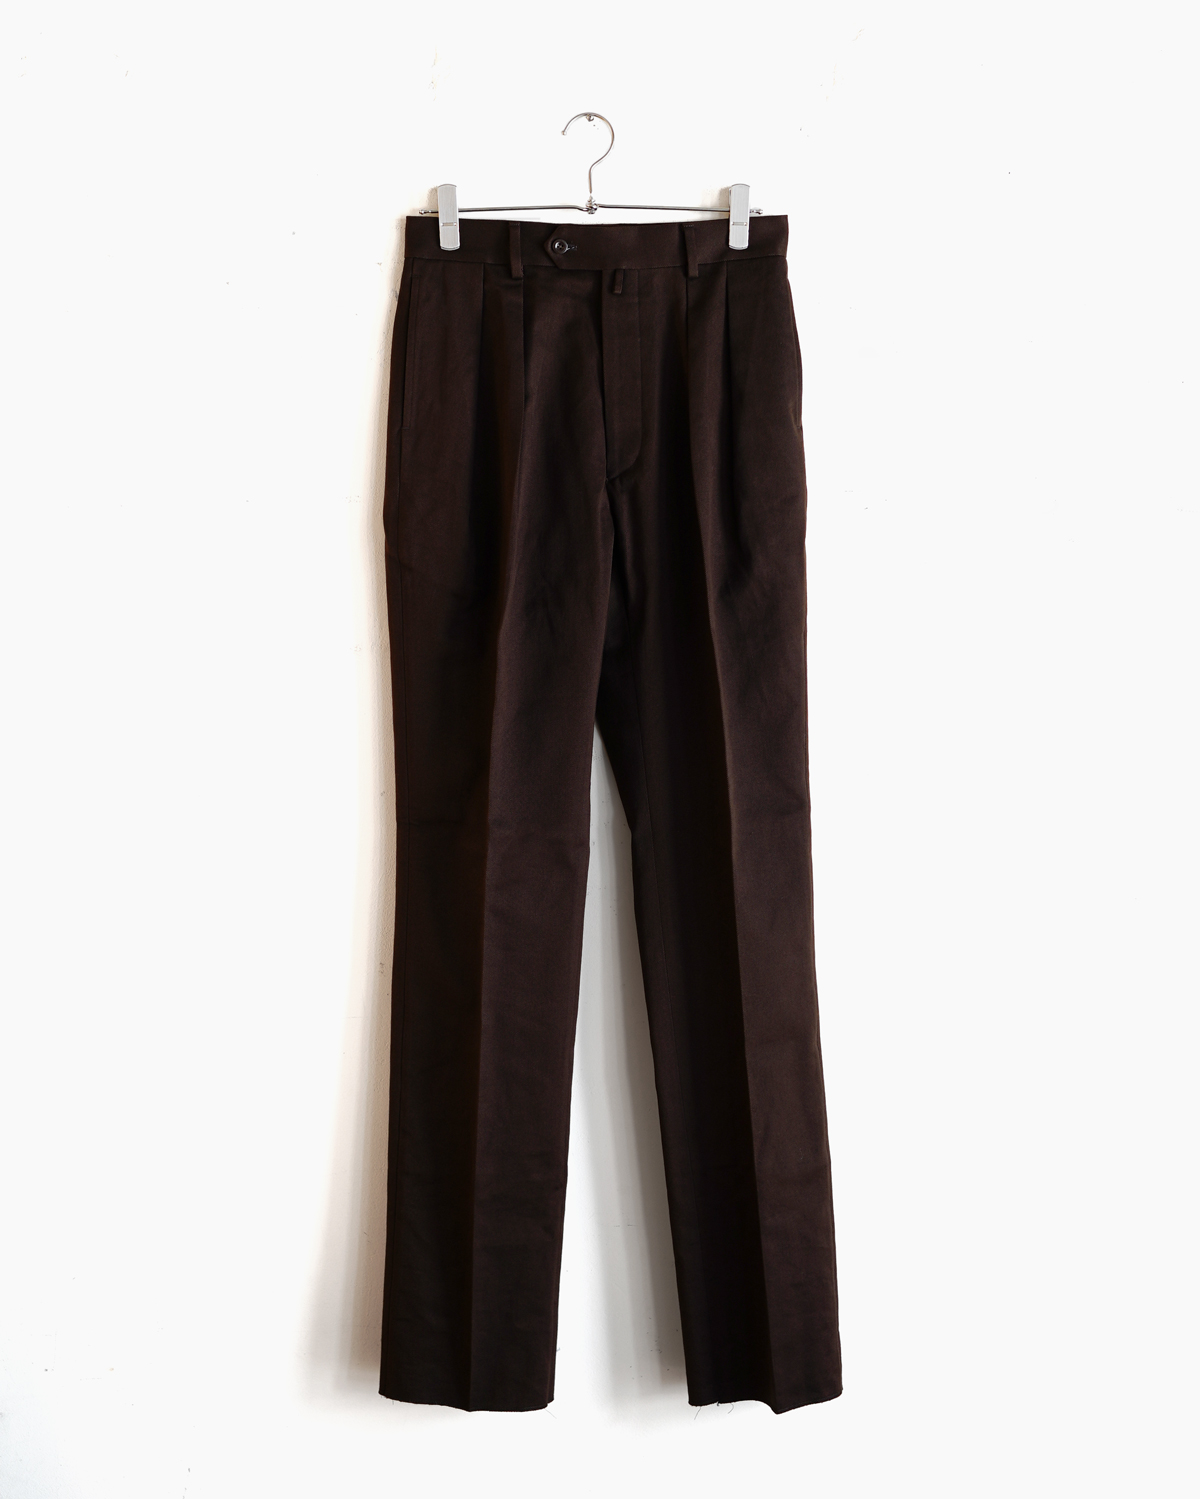 SUSTAINABLE DRILL TWILL COTTON｜STANDARD TYPE Ⅰ - Brown｜NEAT